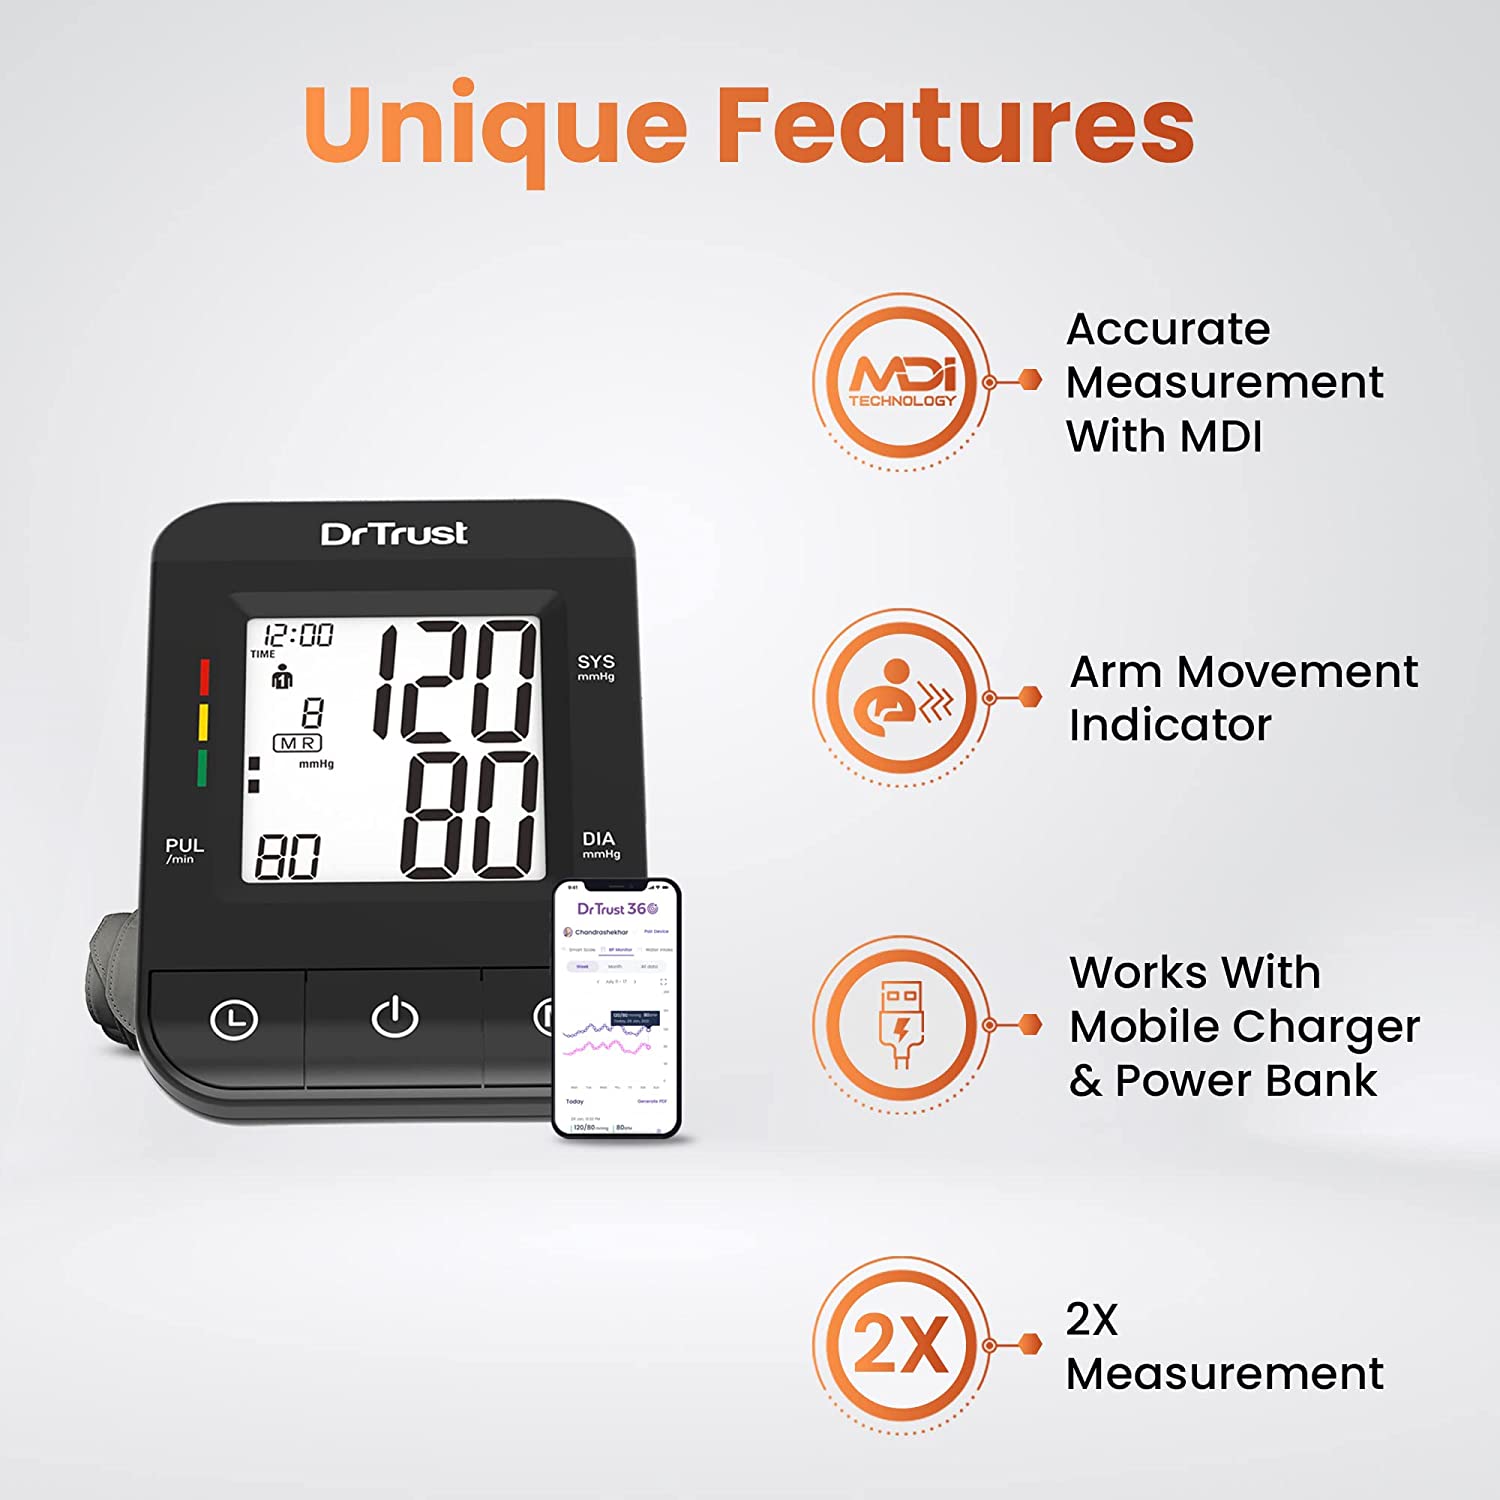 Dr-Trust-USA-Fully-Automatic-Comfort-Digital-Blood-Pressure-BP-Monitor-Machine-with-Mdi-Technology3.jpg